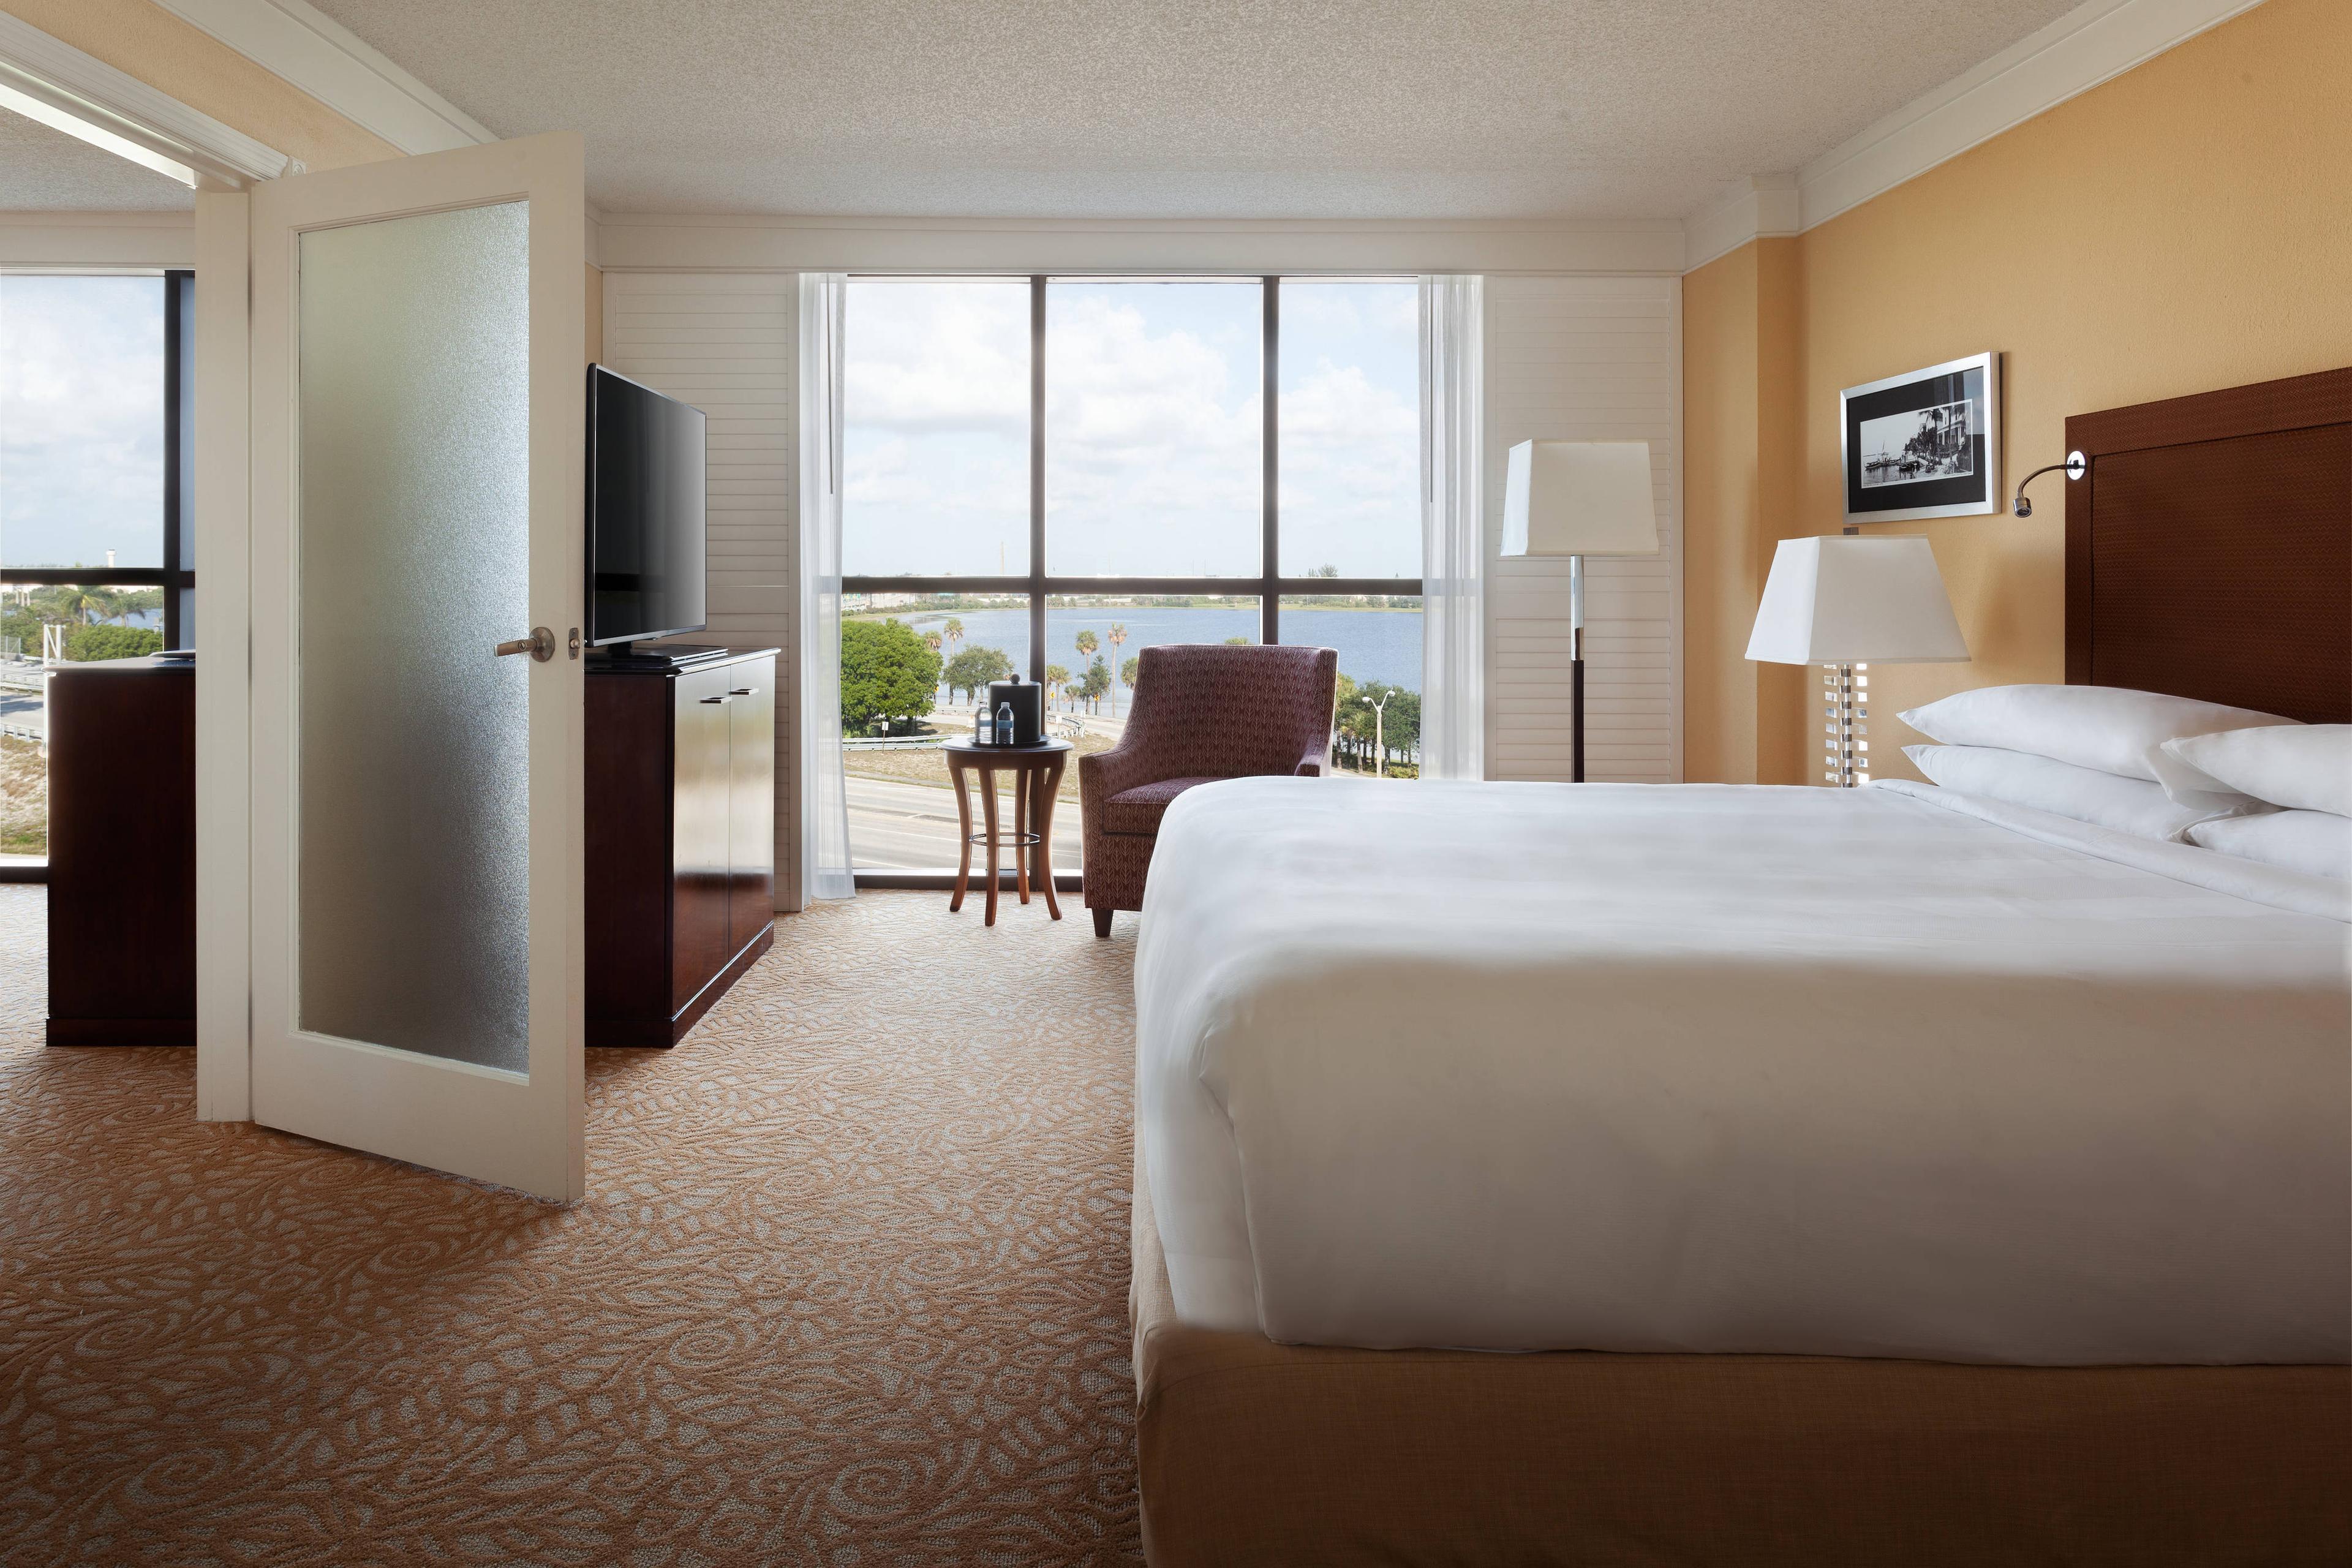 Each of our West Palm Beach hotel suites is equipped with a private bedroom, king bed and stunning views of the lake.